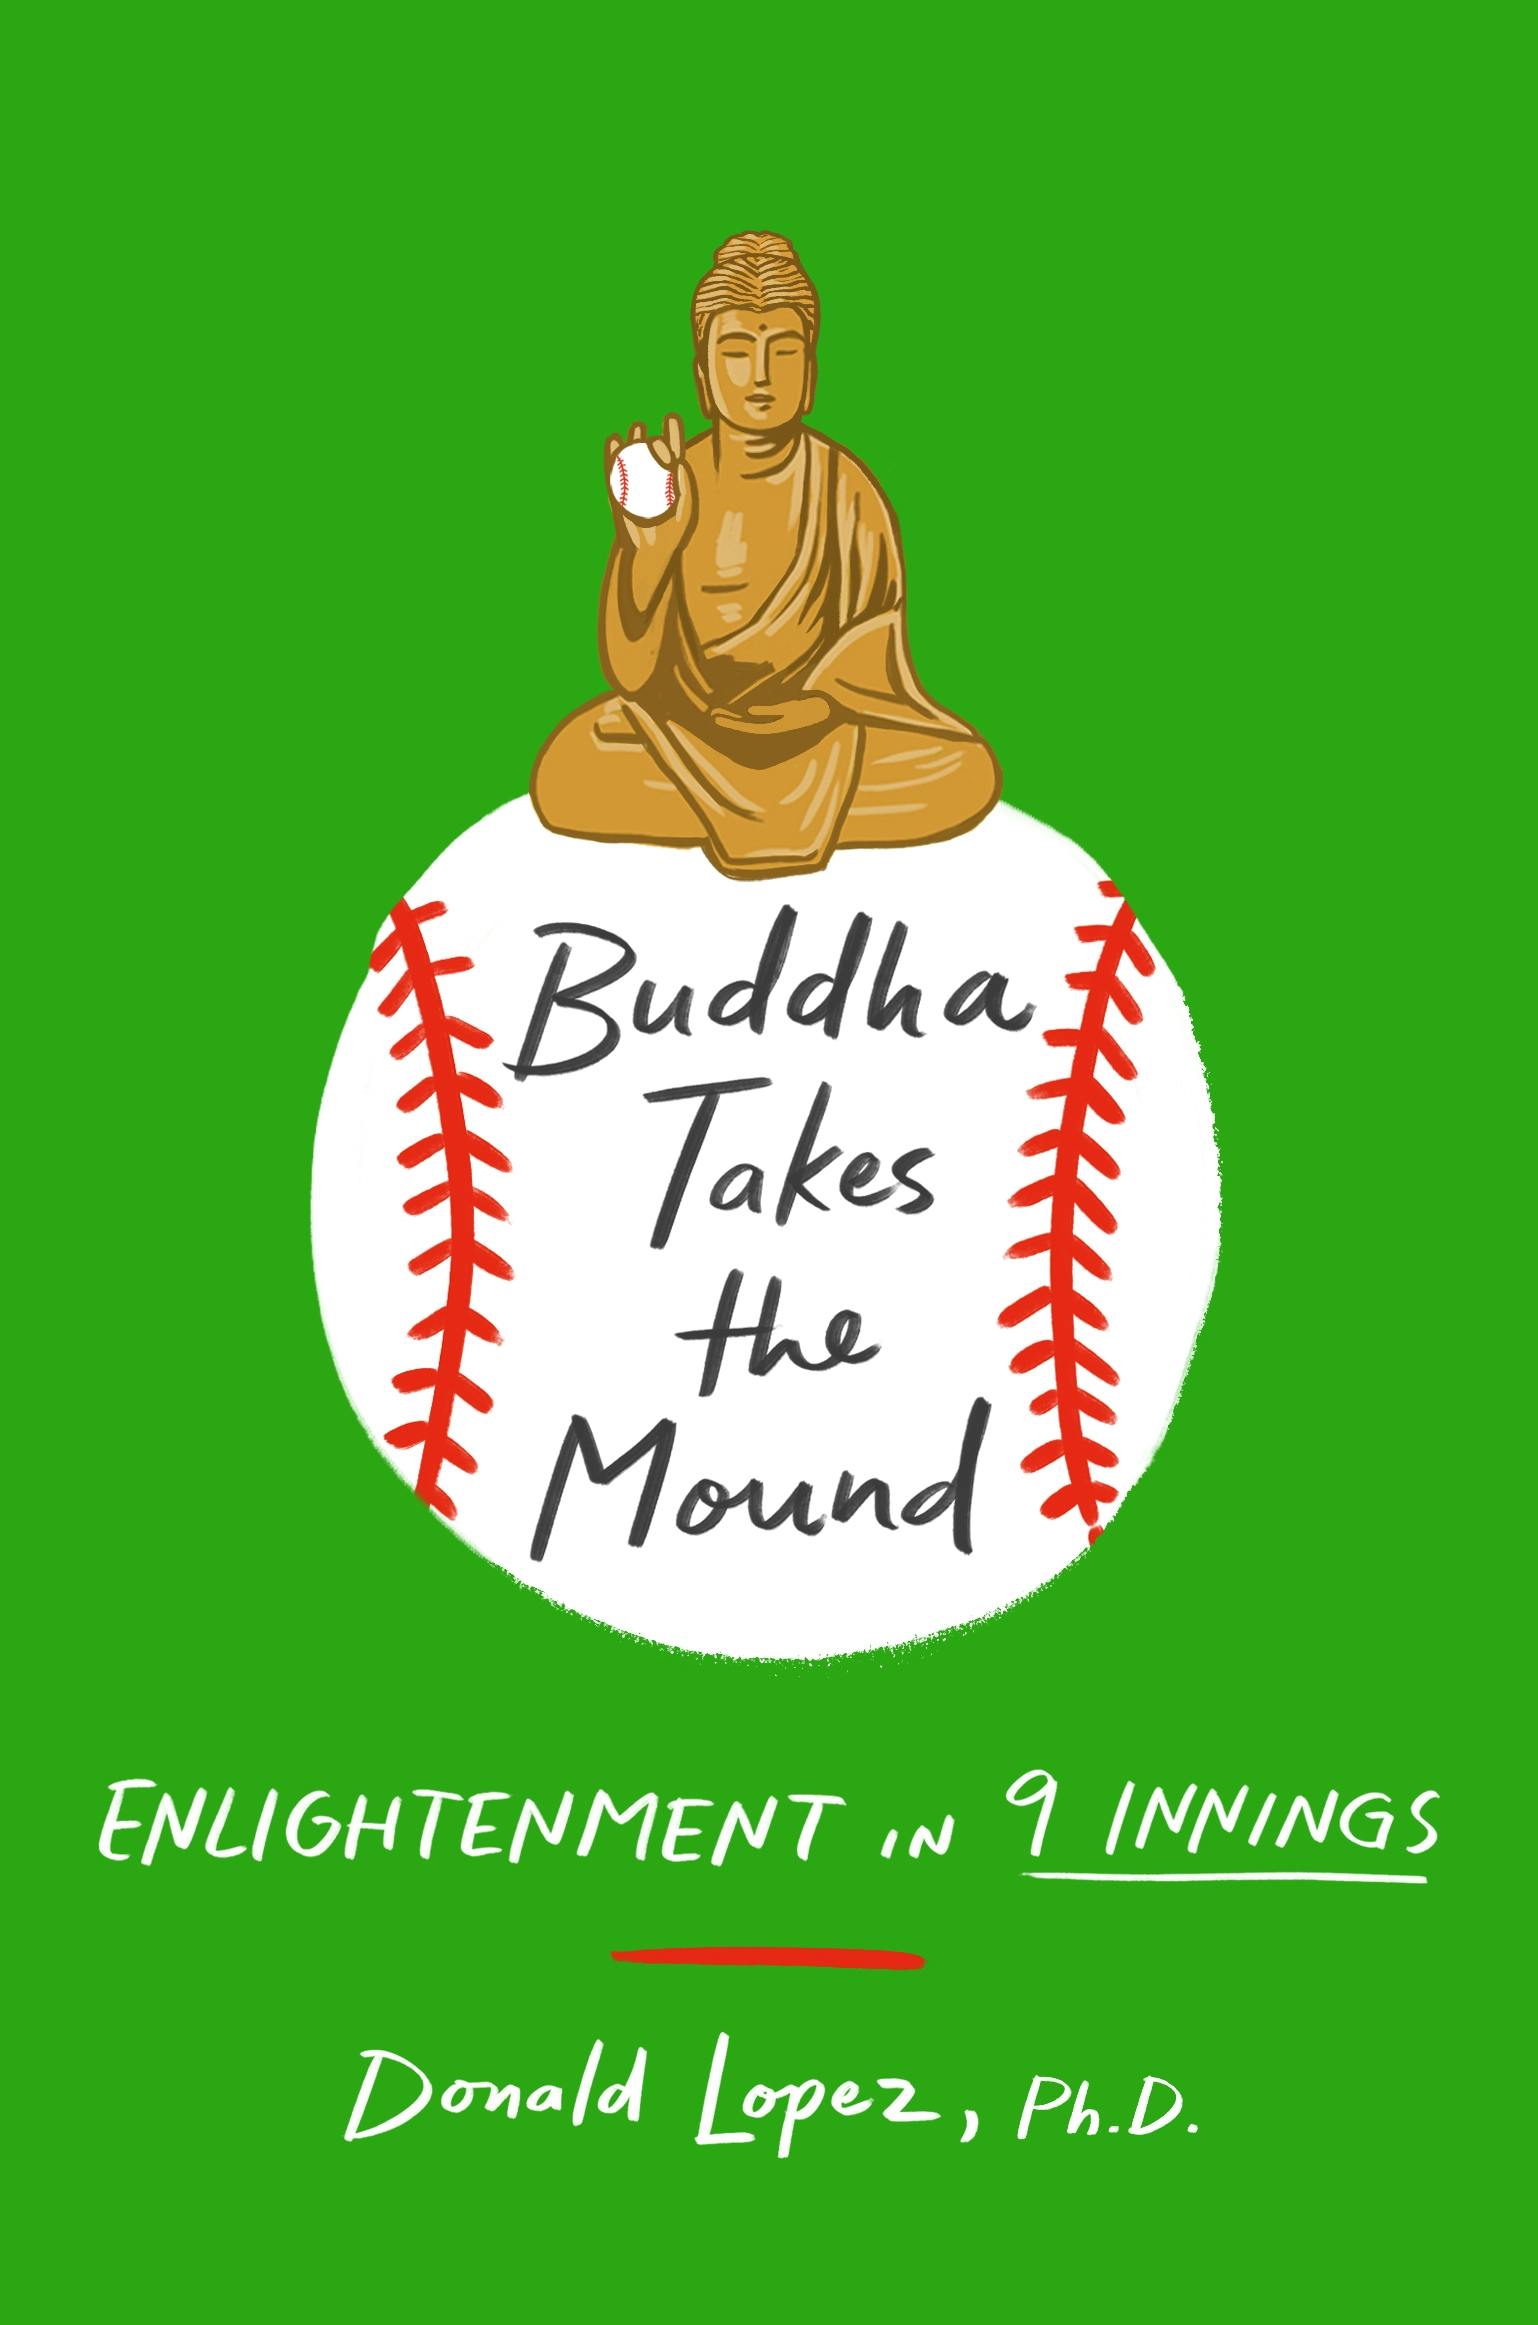 Introducing . . . Buddha's Hand - Los Angeles Times